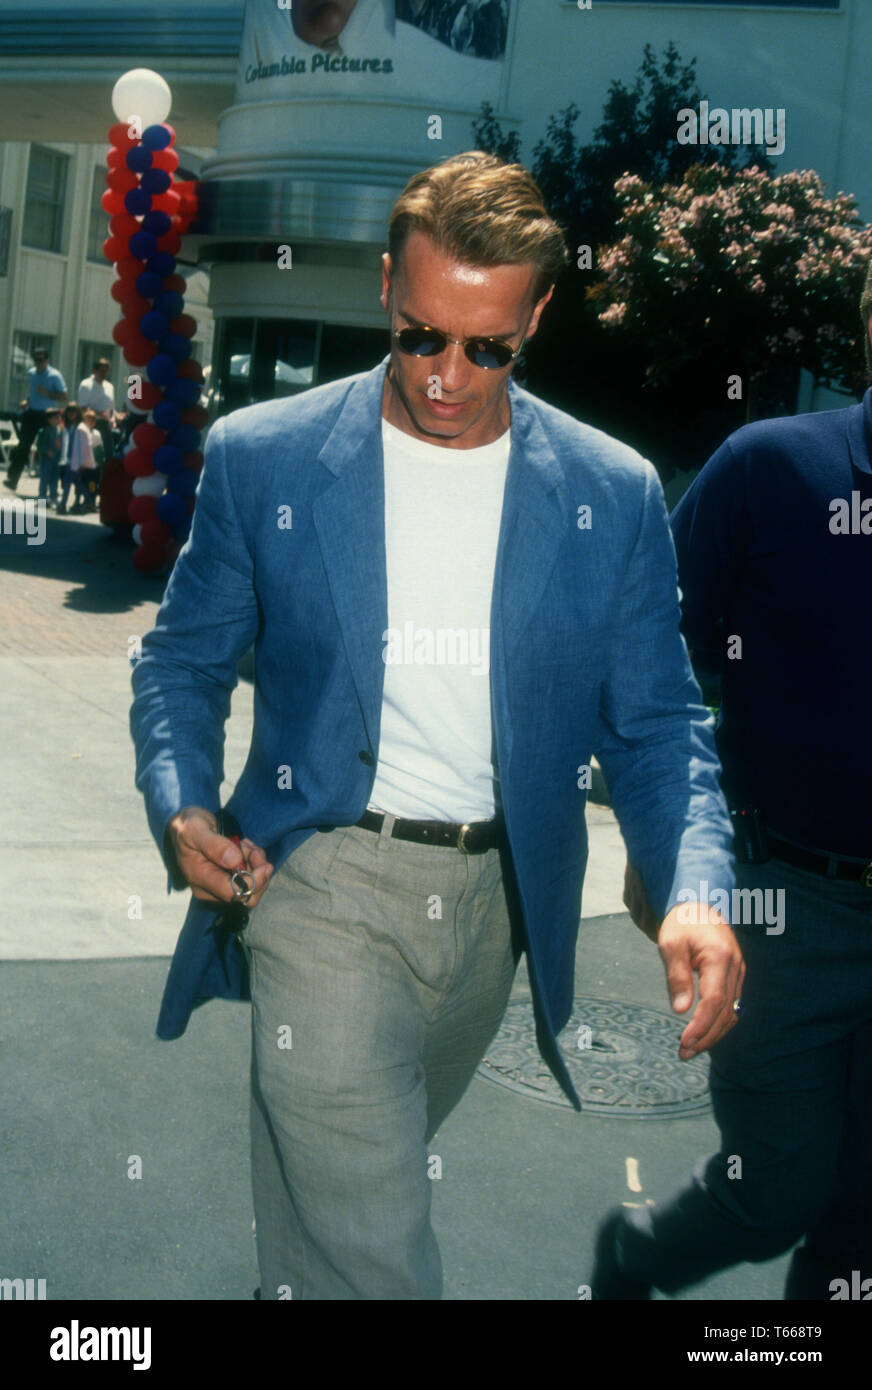 Culver City, California, USA 10th April, 1994  Actor Arnold Schwarzenegger attends TriStar Pictures 'Cops and Robbersons' Premiere on April 10, 1994 at Sony Studios in Culver City, California, USA. Photo by Barry King/Alamy Stock Photo Stock Photo